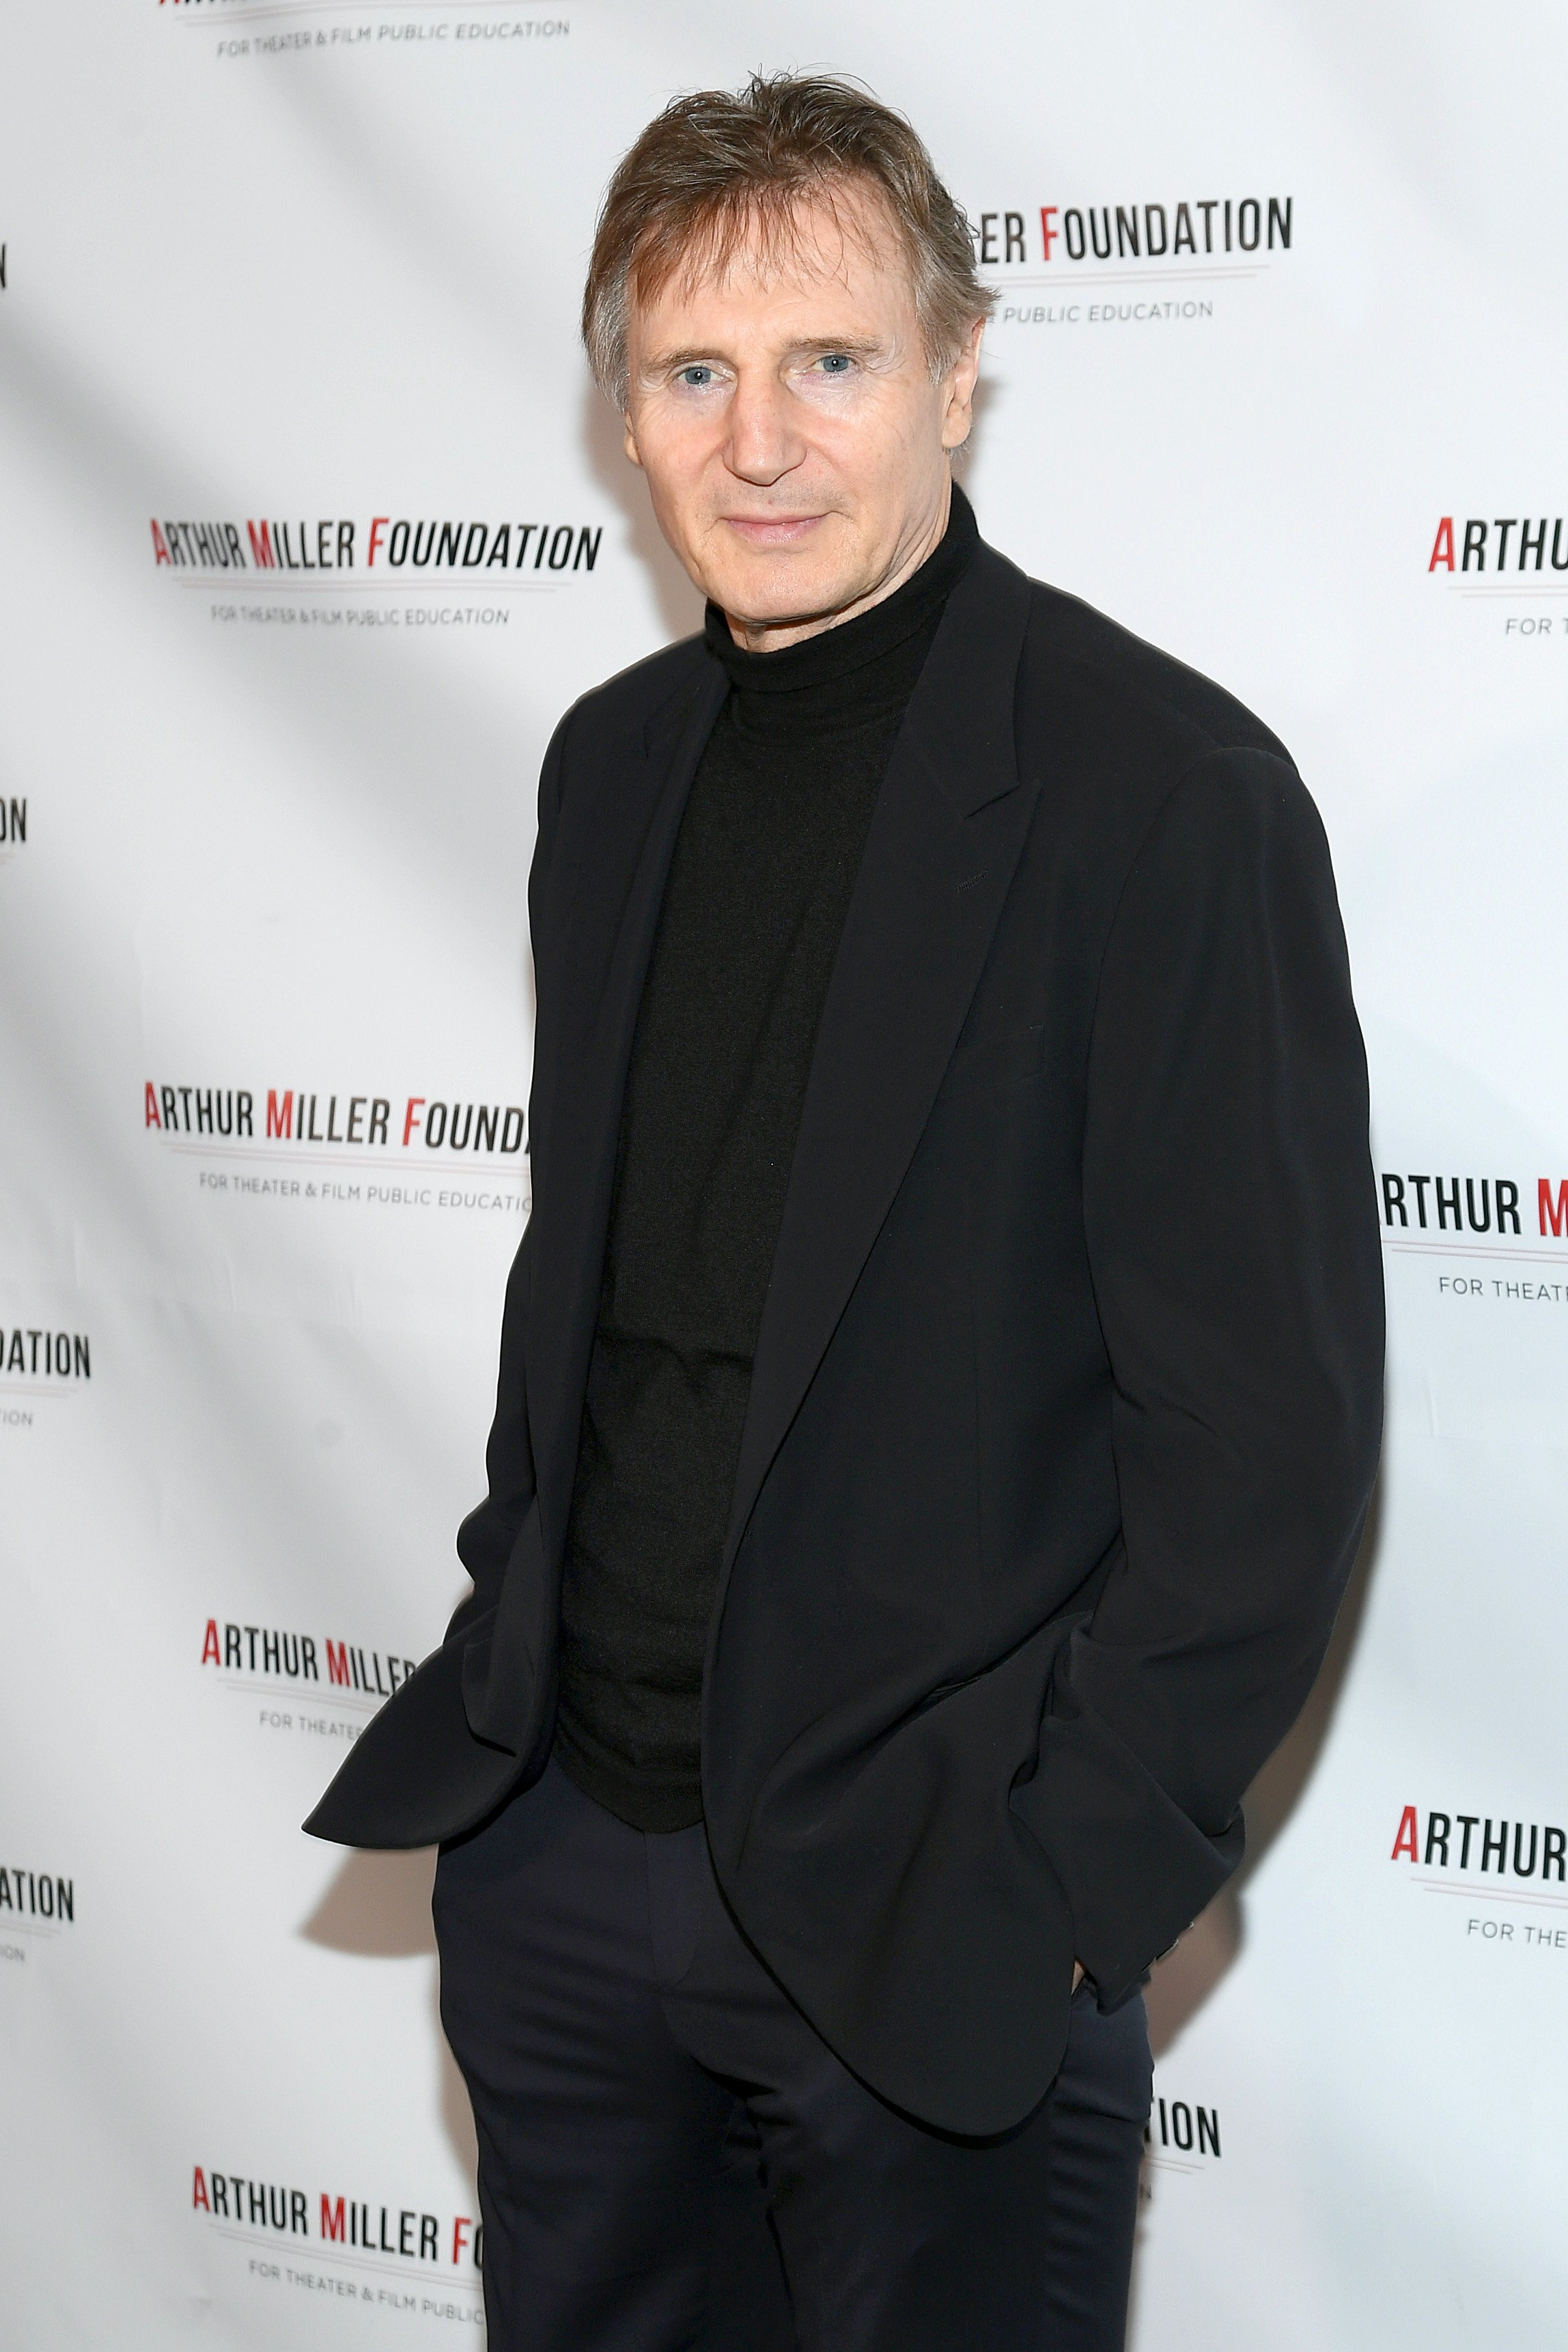 Liam Neeson at the 2018 Arthur Miller Foundation Honors in NYC on October 22, 2018. | Photo: Getty Images.